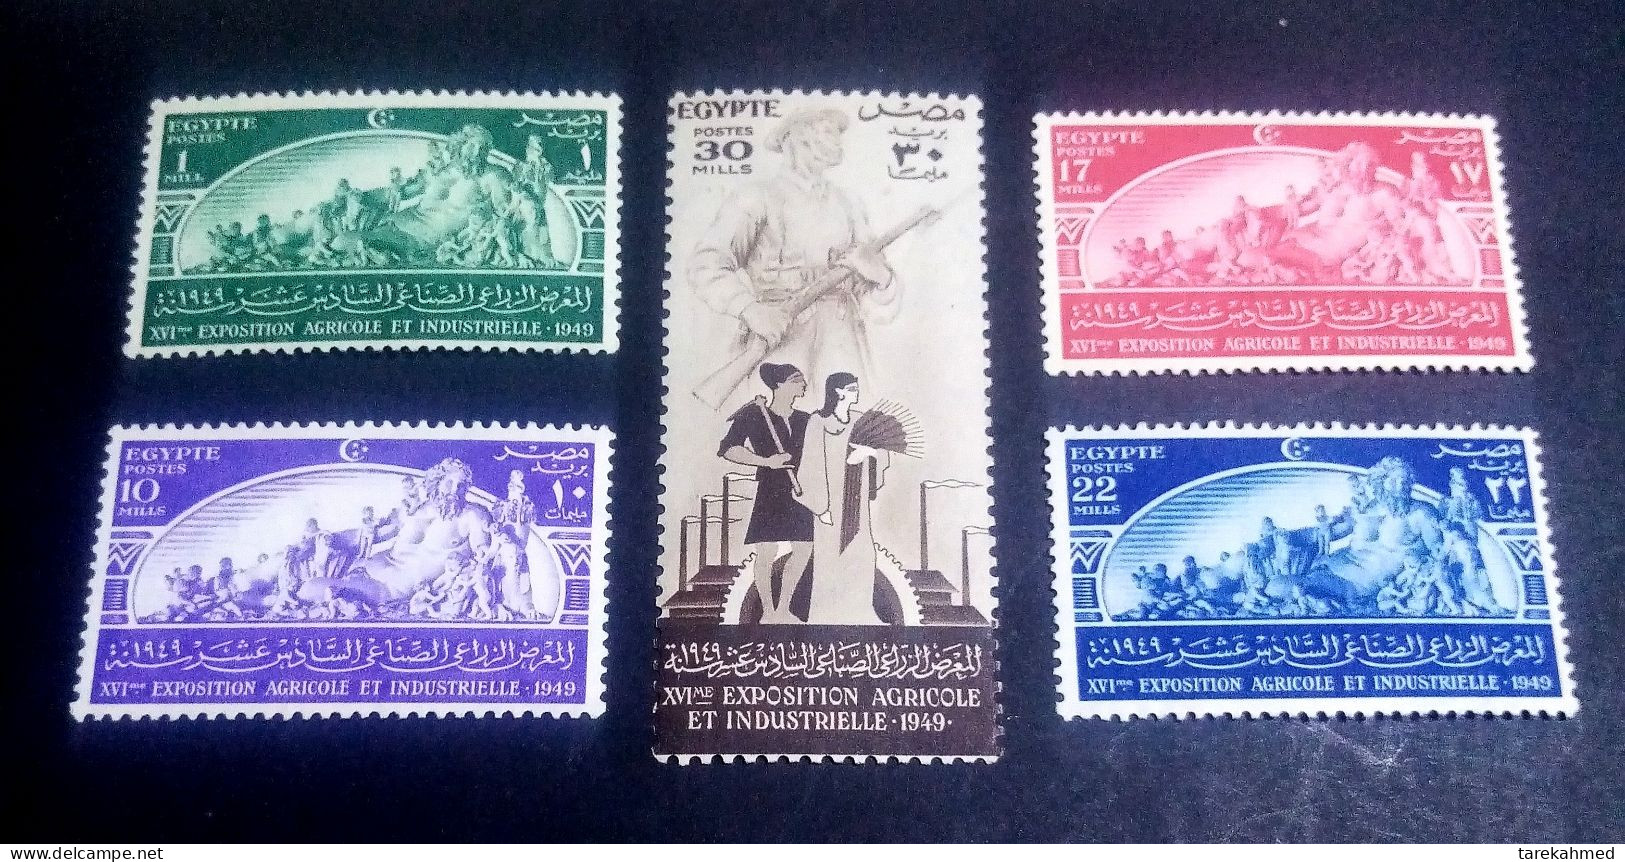 EGYPT KINGDOM 1949 , AGRICULTURE & INDUSTRY EXPOSITION S.G. 352-356 . Super MNH - Unused Stamps